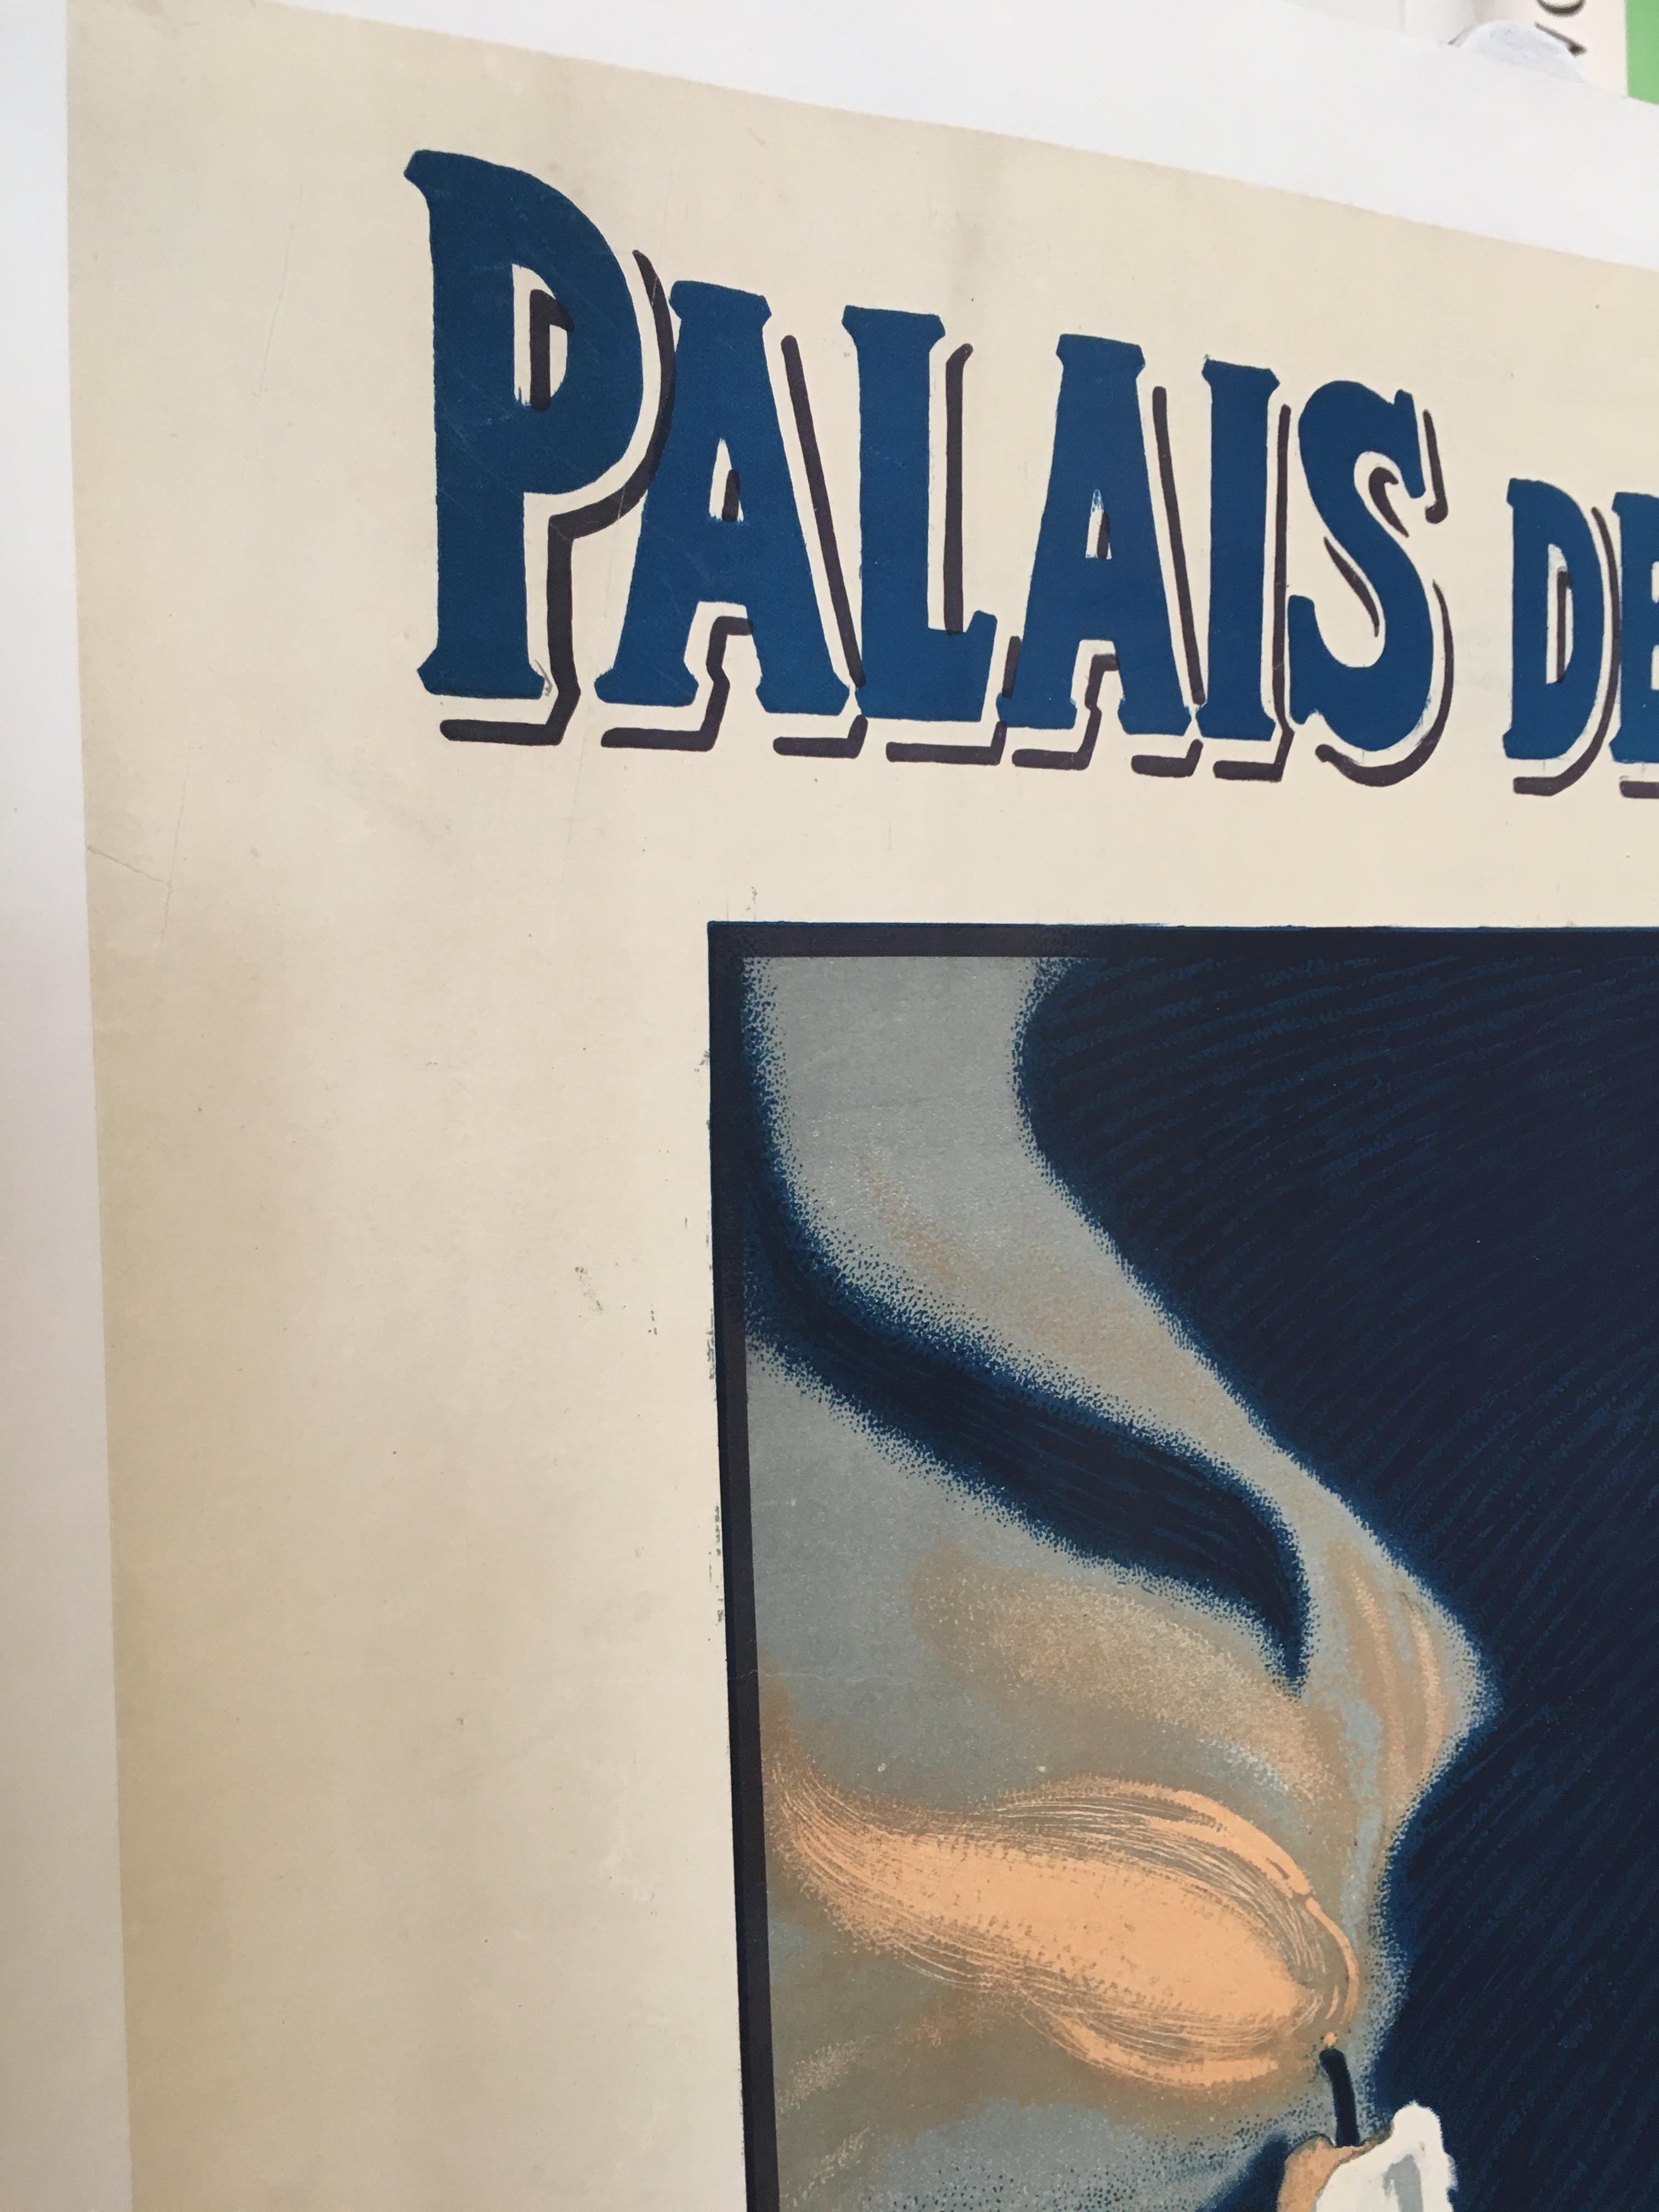 Original Vintage French Advertising Poster 'Palais de L'Hippodrome Blaas Uit' In Good Condition For Sale In Melbourne, Victoria